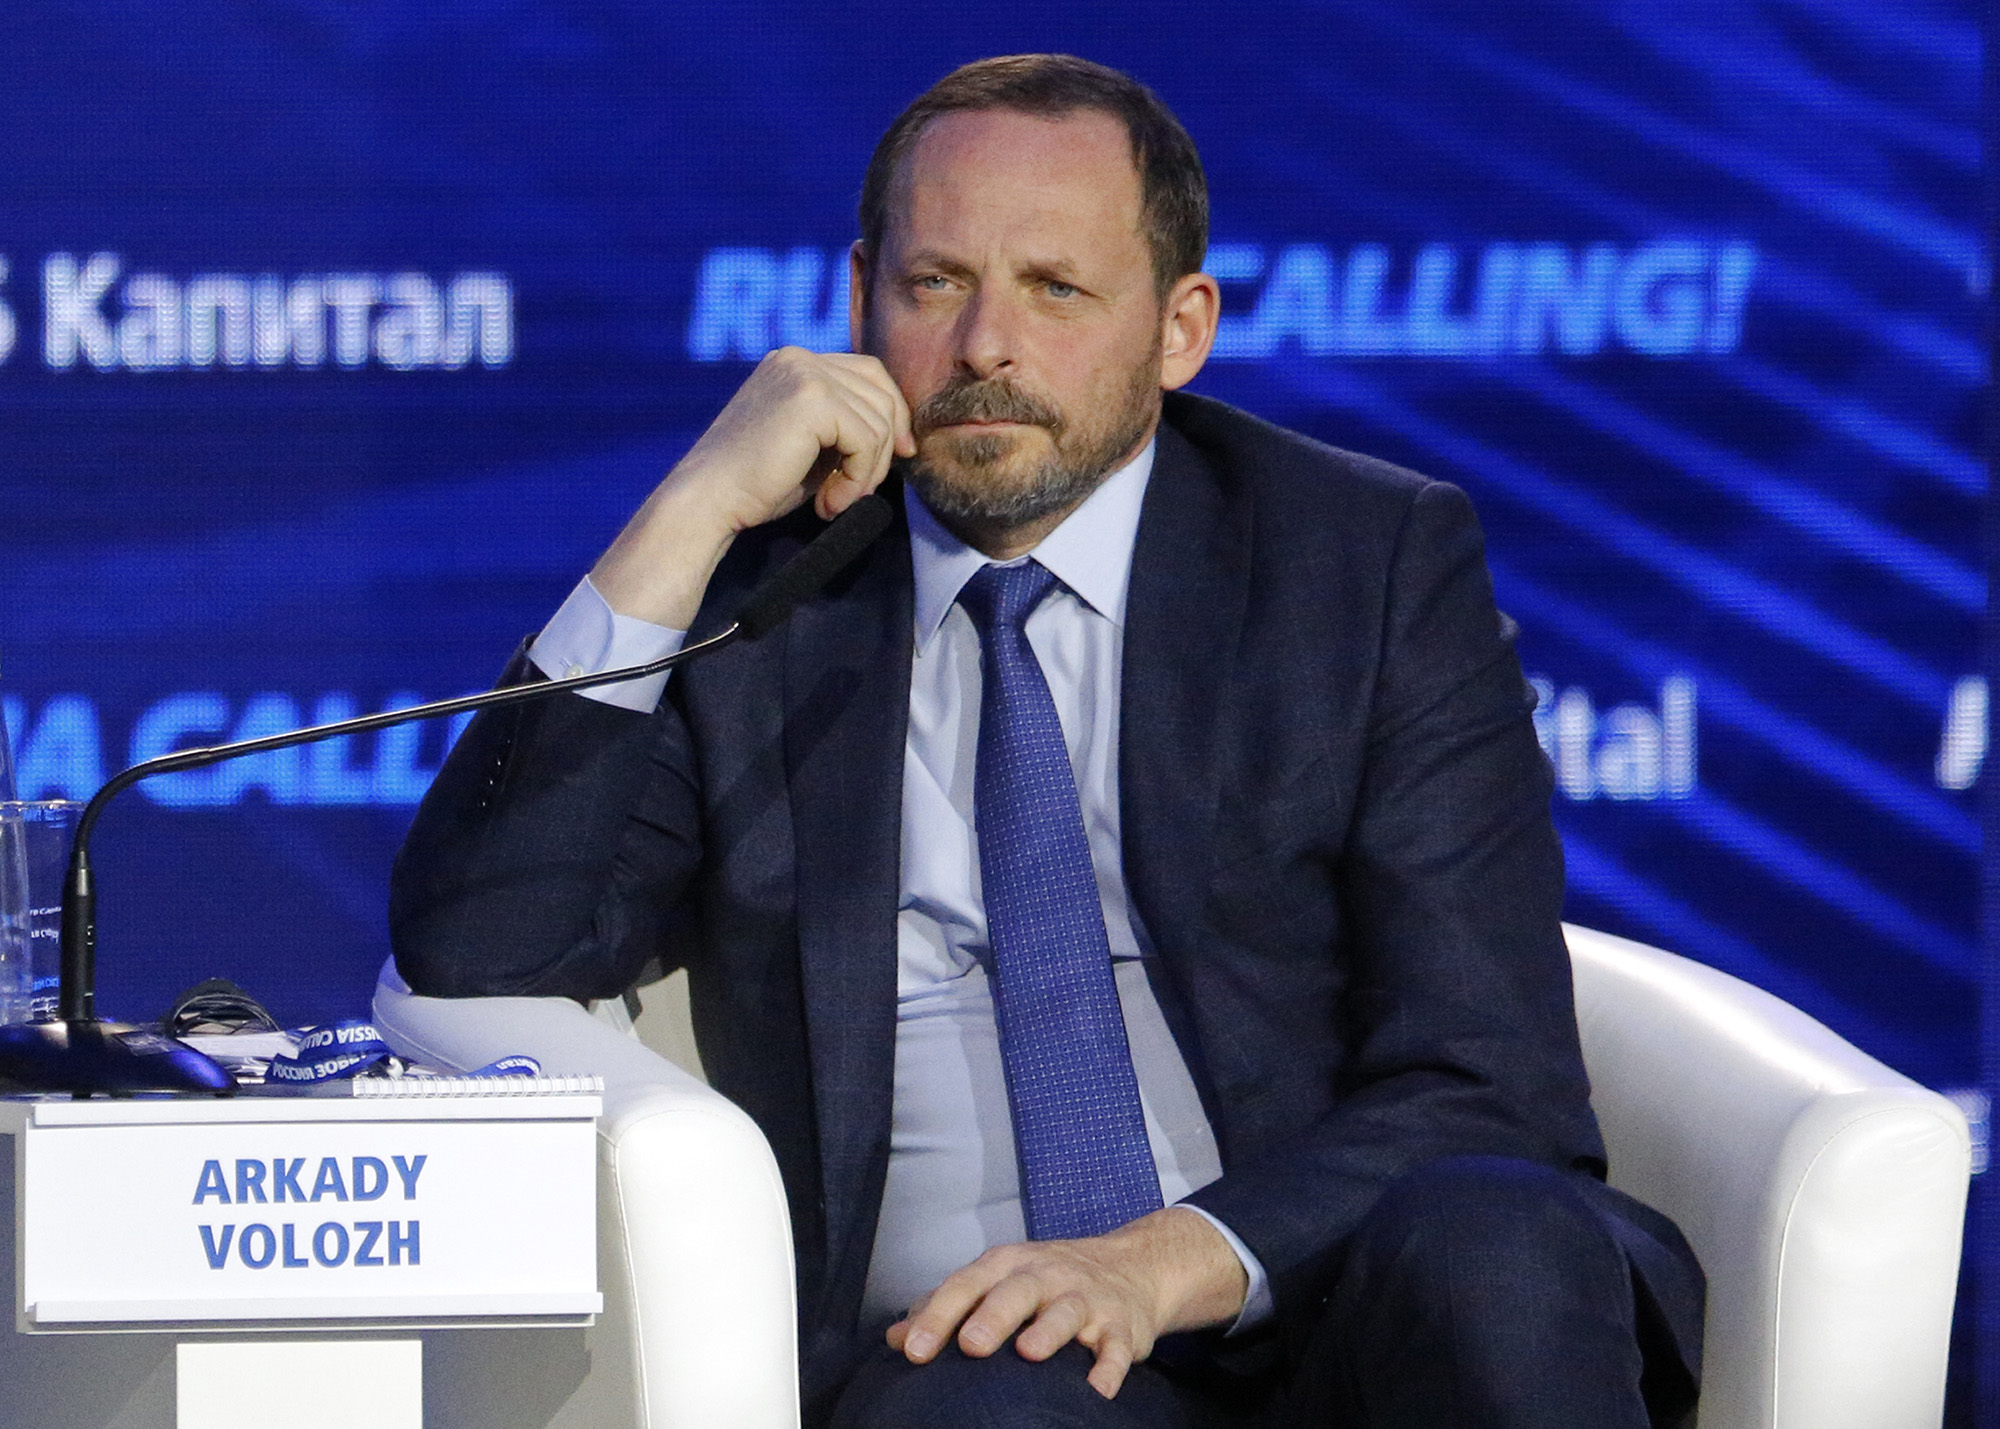 Arkady Volozh, Russia's largest internet search engine Yandex CEO, attends an Investment Forum in Moscow, Russia, on November 20, 2019.